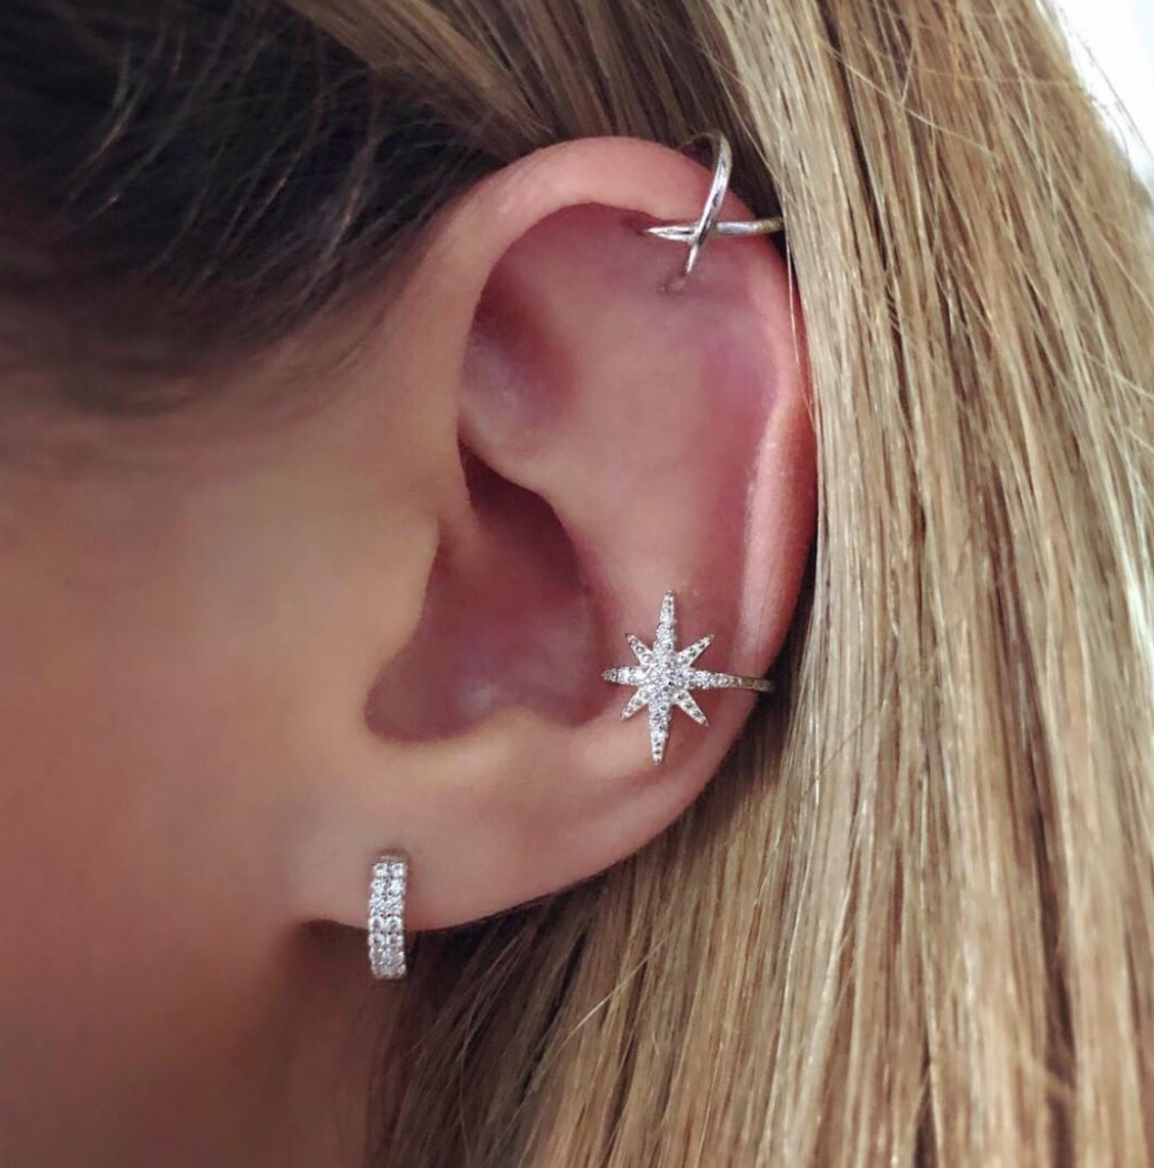 Cubic zirconia encrusted huggie hoops with multiple Riptide 5 earrings including silver starburst ear cuff, and sterling silver criss cross ear cuff